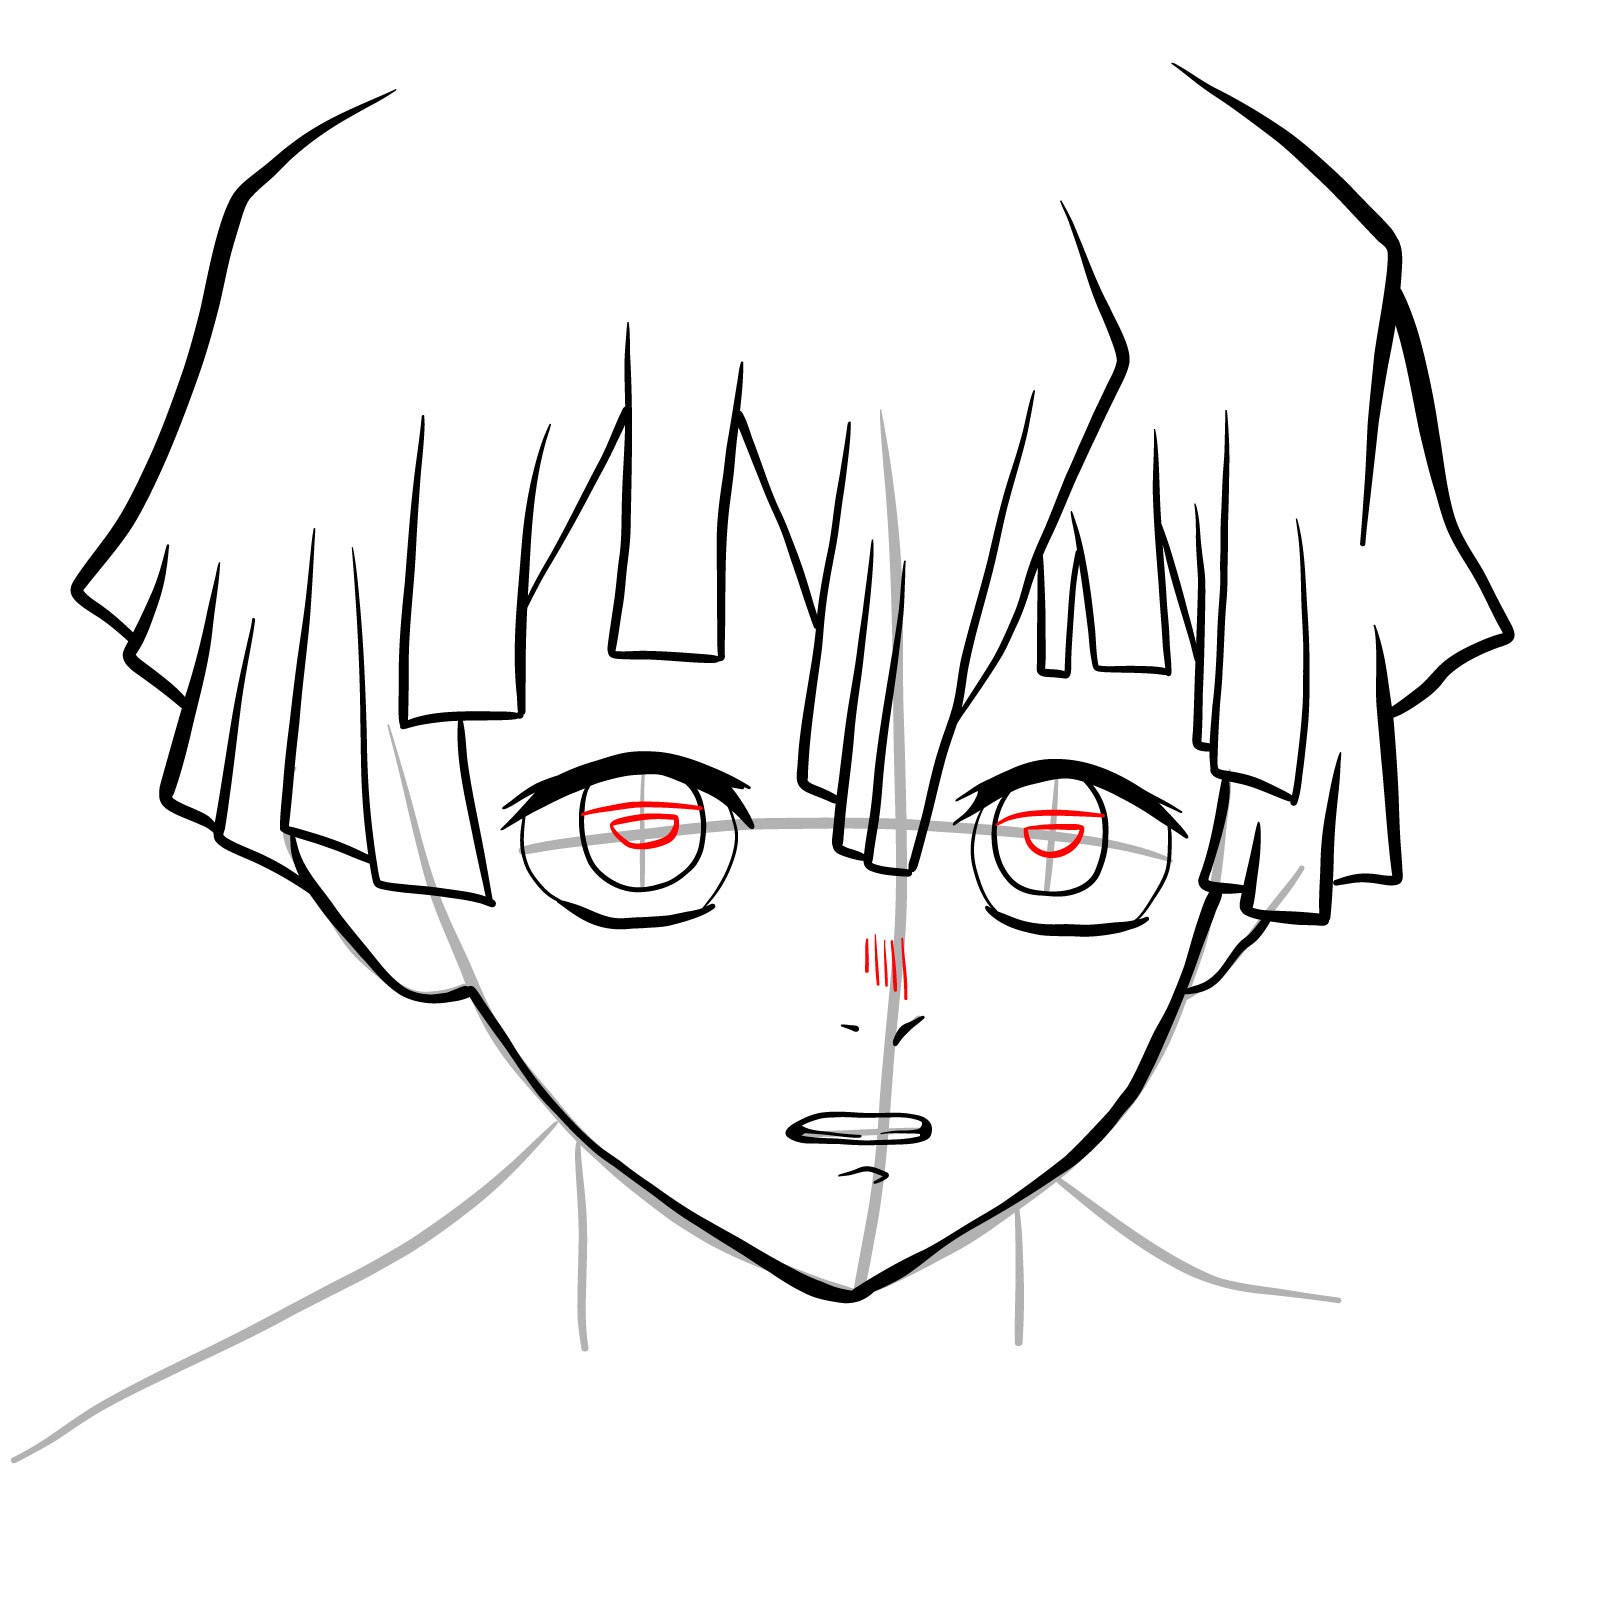 How to draw Zenitsu's face - step 14